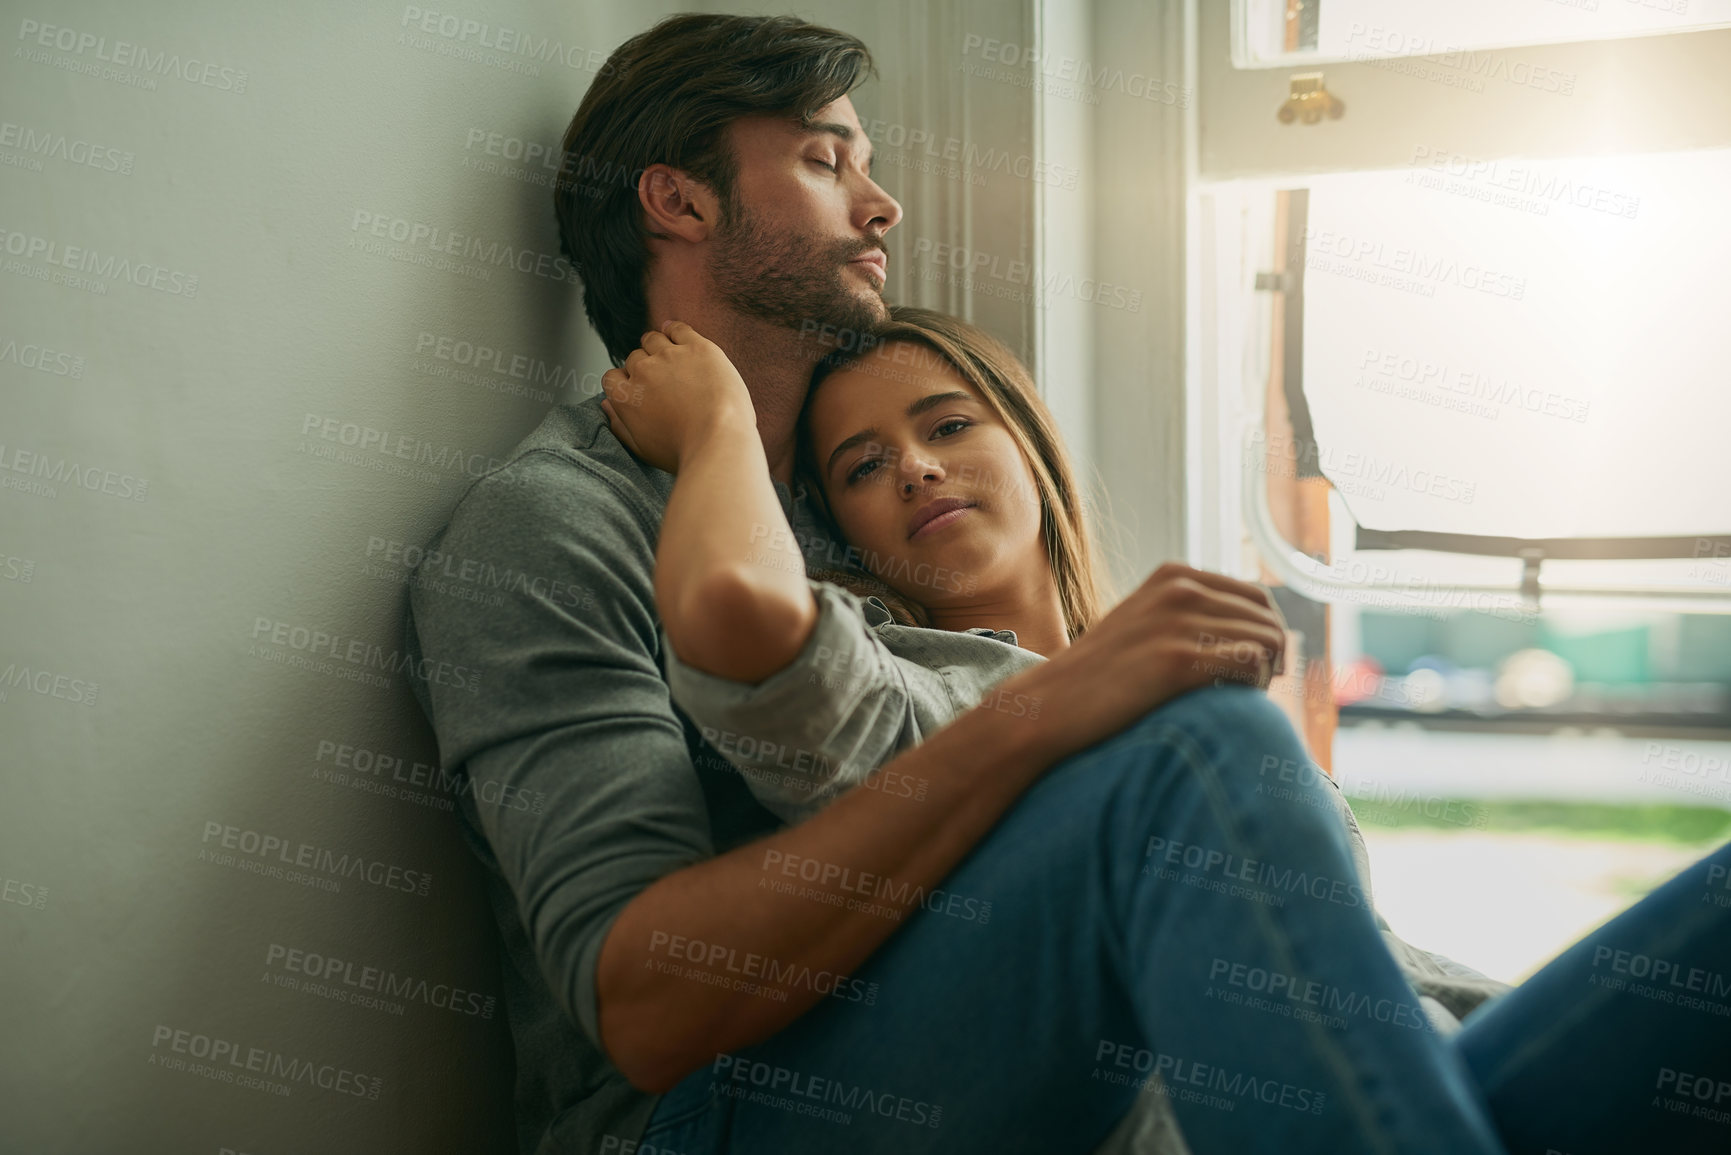 Buy stock photo Shot of an affectionate young couple at home holding each other